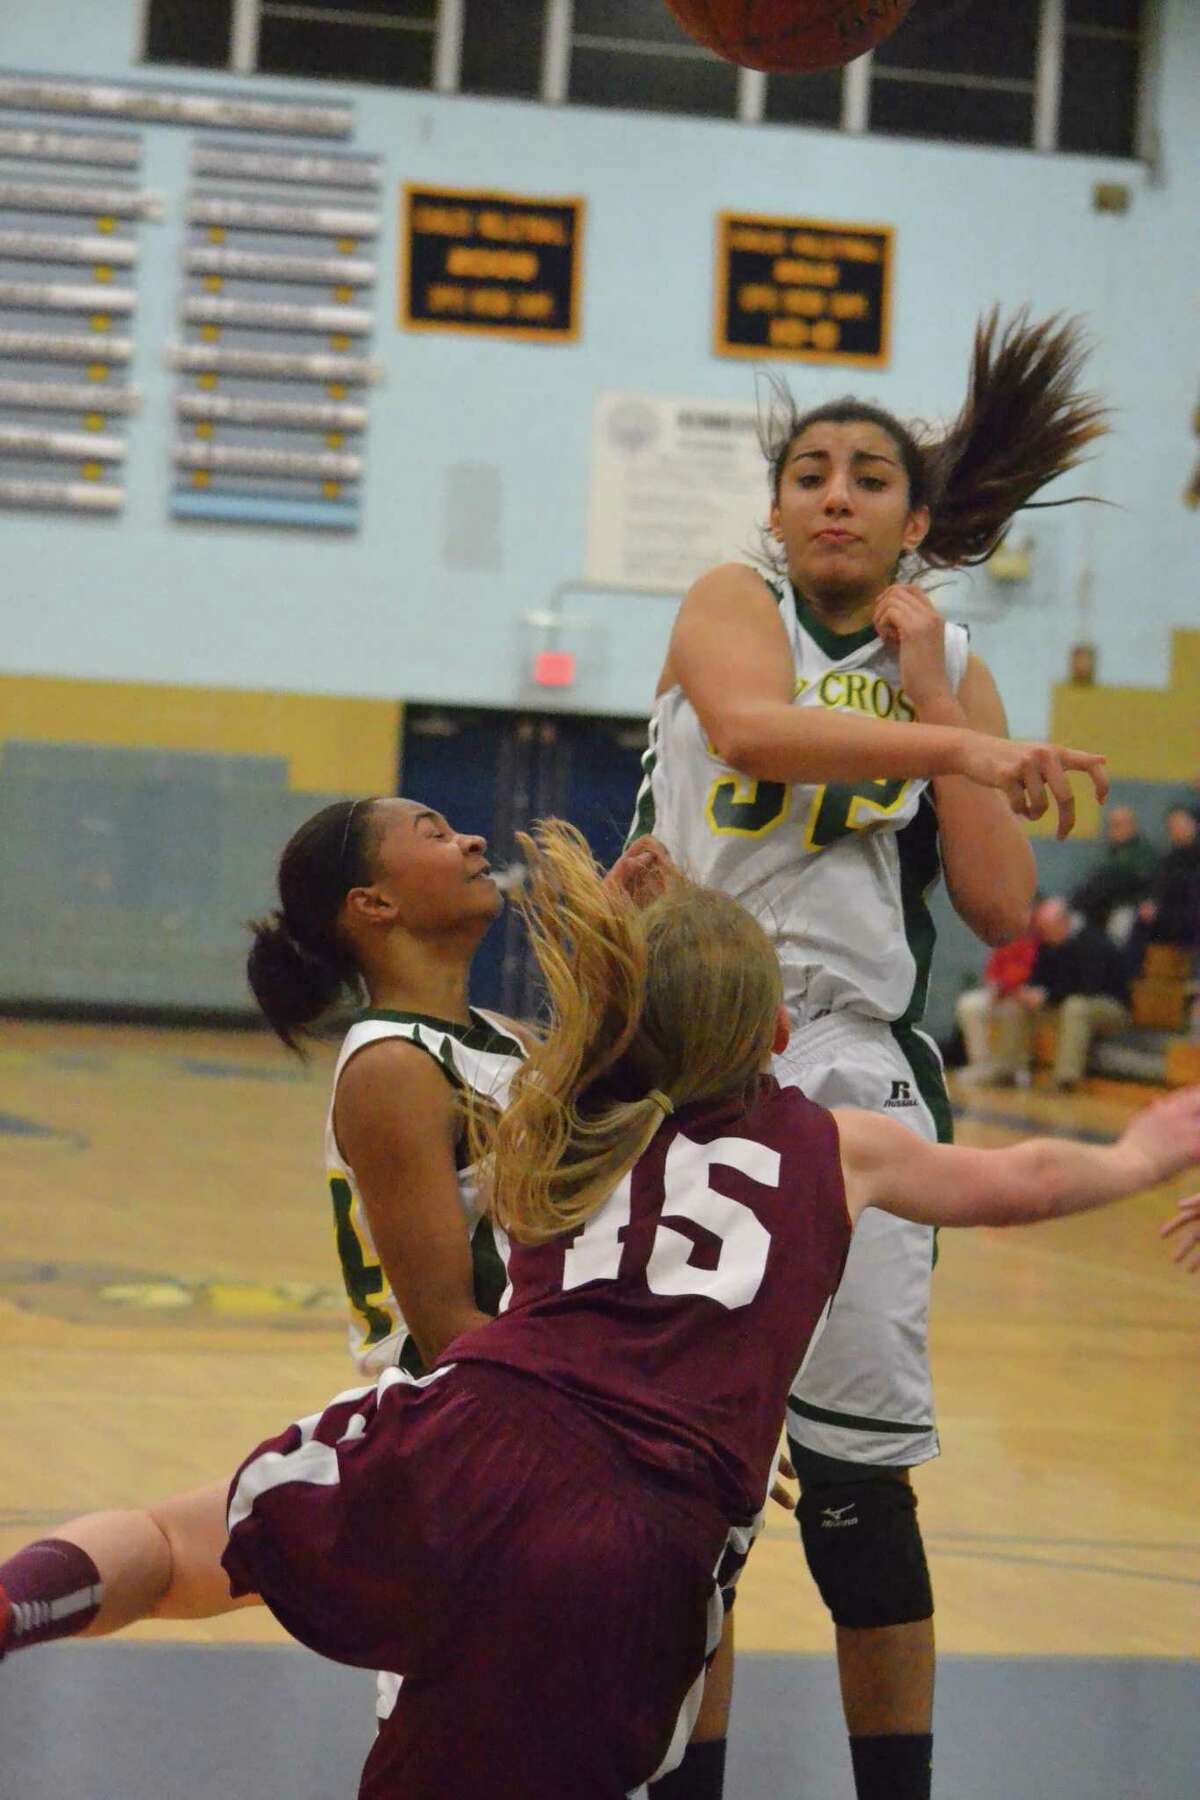 Holy Cross’ Kiera O’Donnell blocks Torrington’s Caroline Teti’s shot attempt in the Crusaders’ 50-41 win over the Red Raiders. With the win Holy Cross clinches a spot in the NVL title game on Friday night.